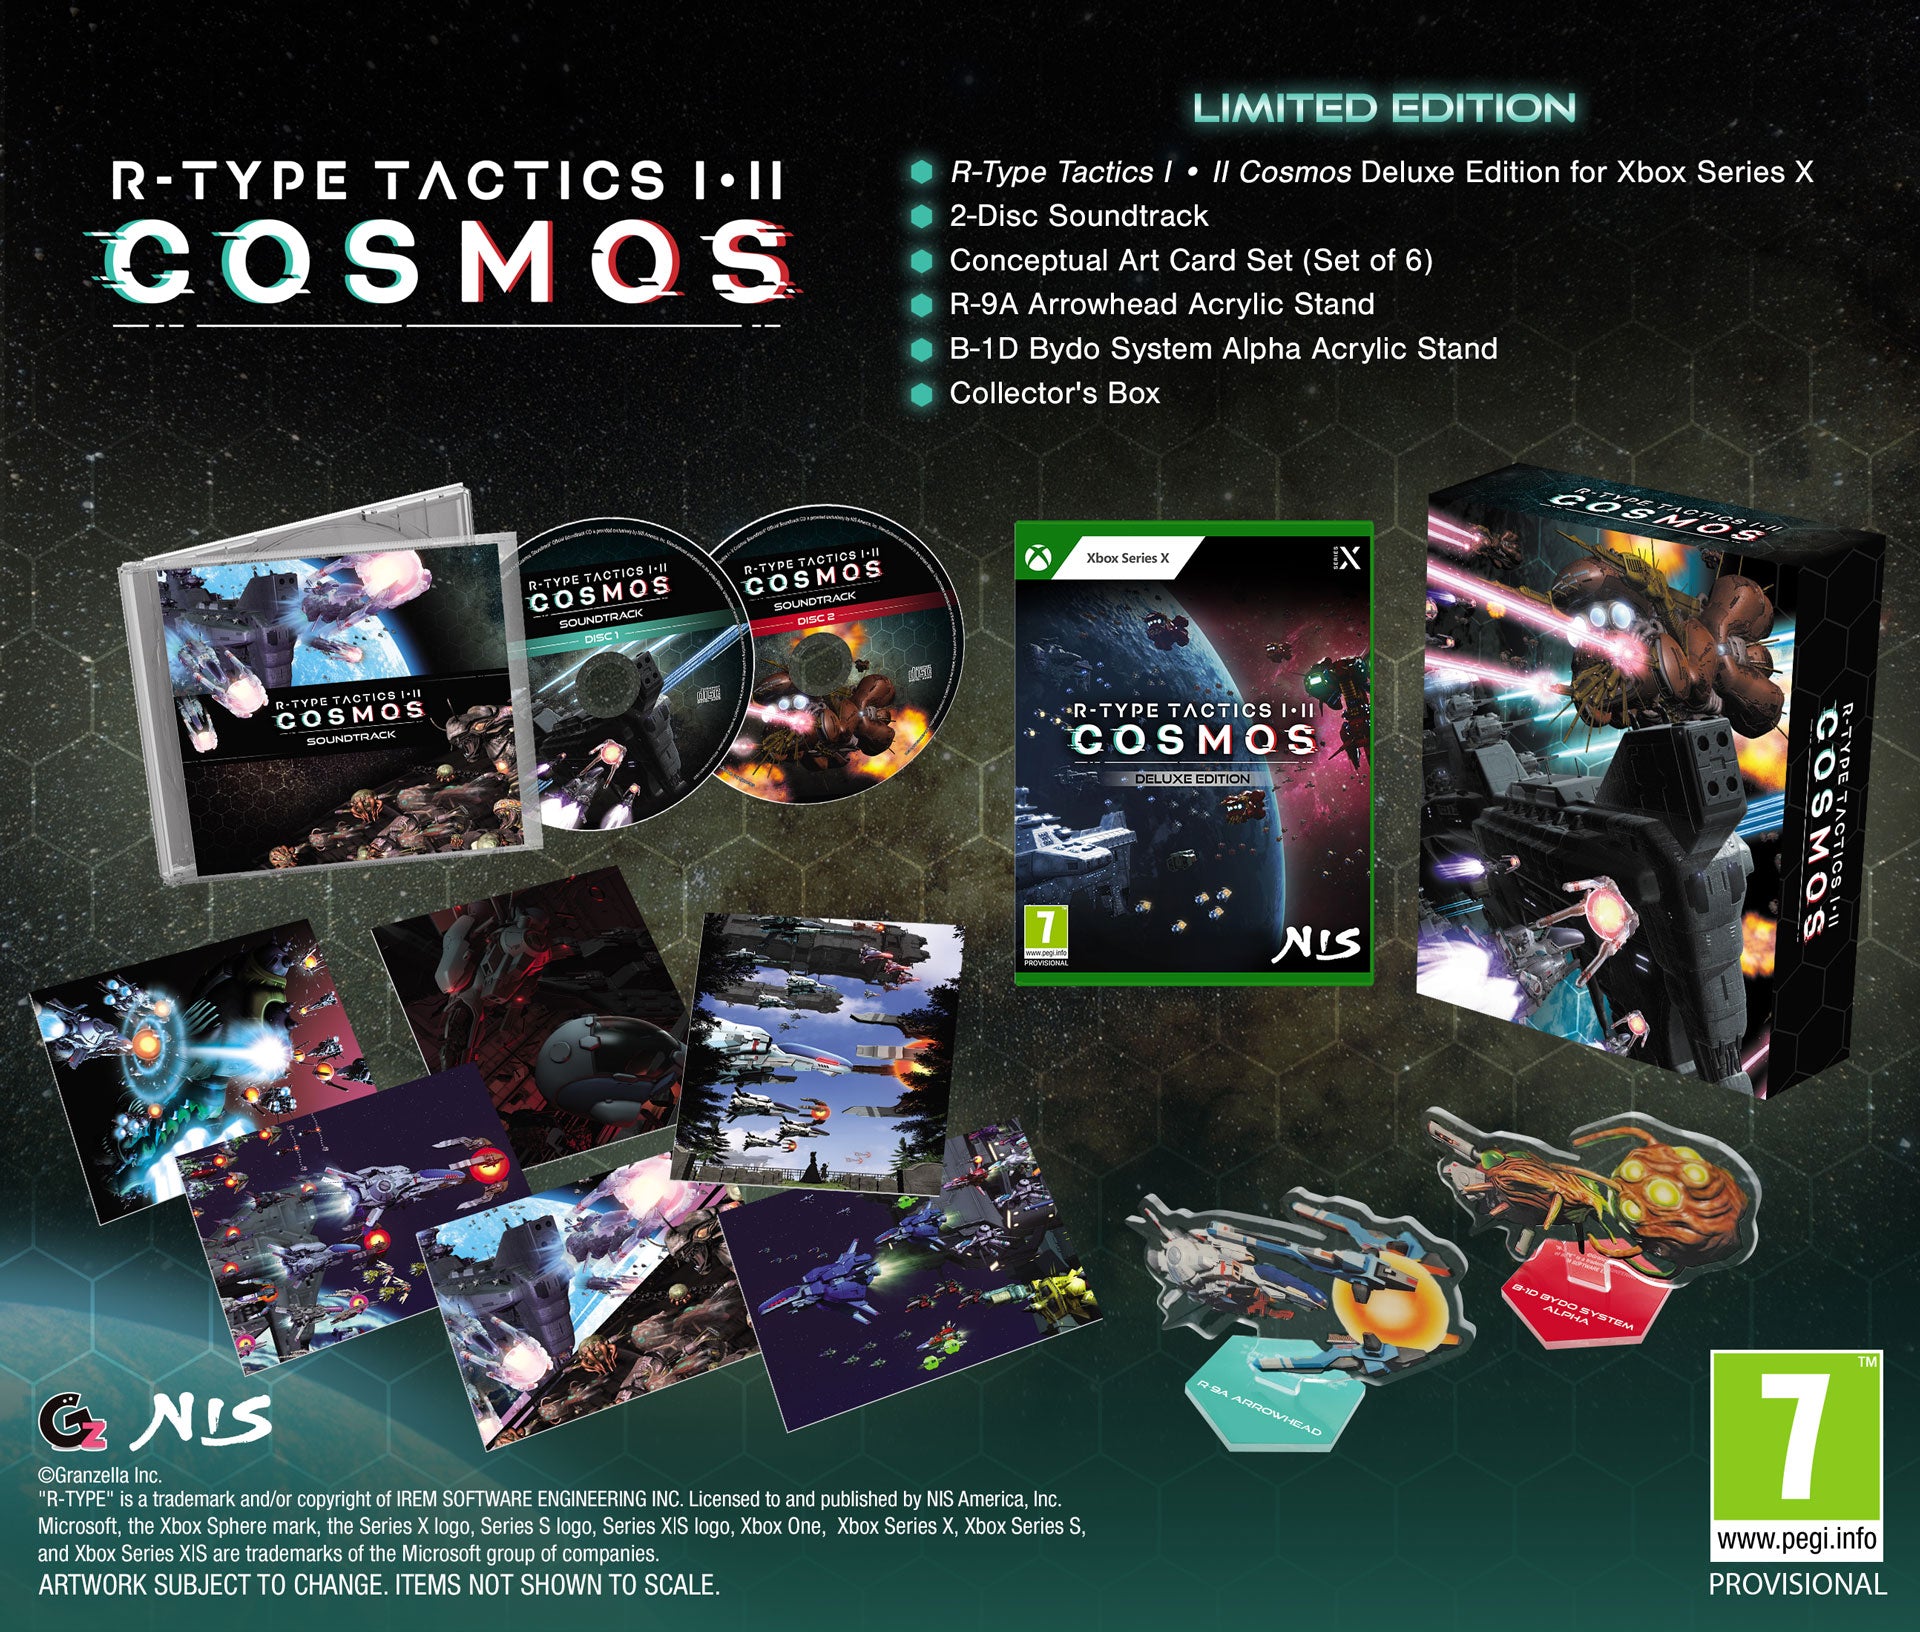 R-Type Tactics I • II COSMOS - Limited Edition -  Xbox Series X